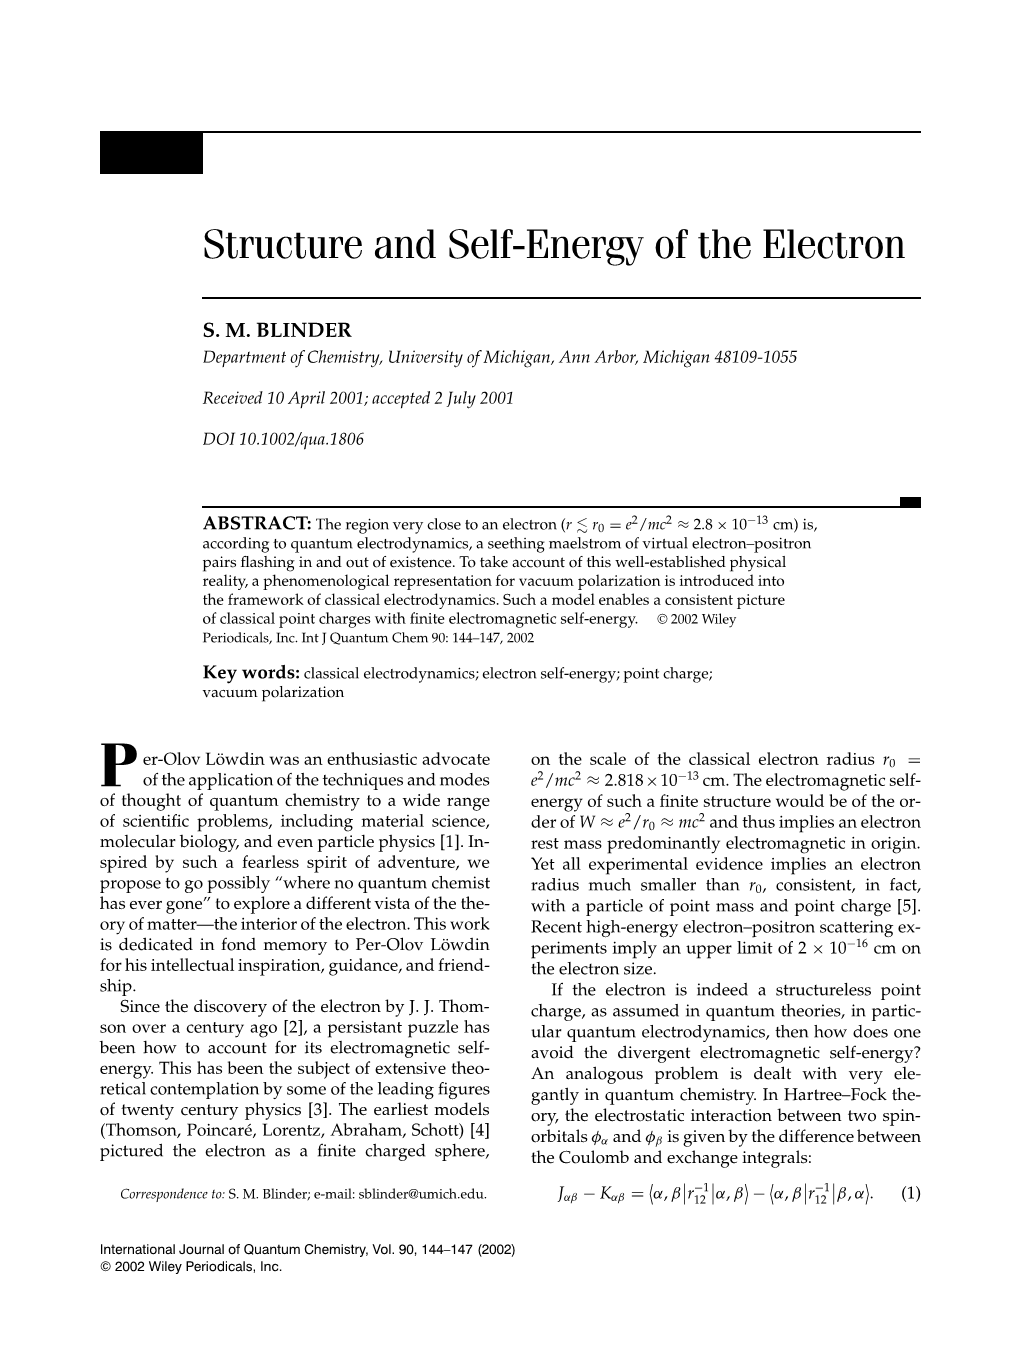 Structure and Self-Energy of the Electron